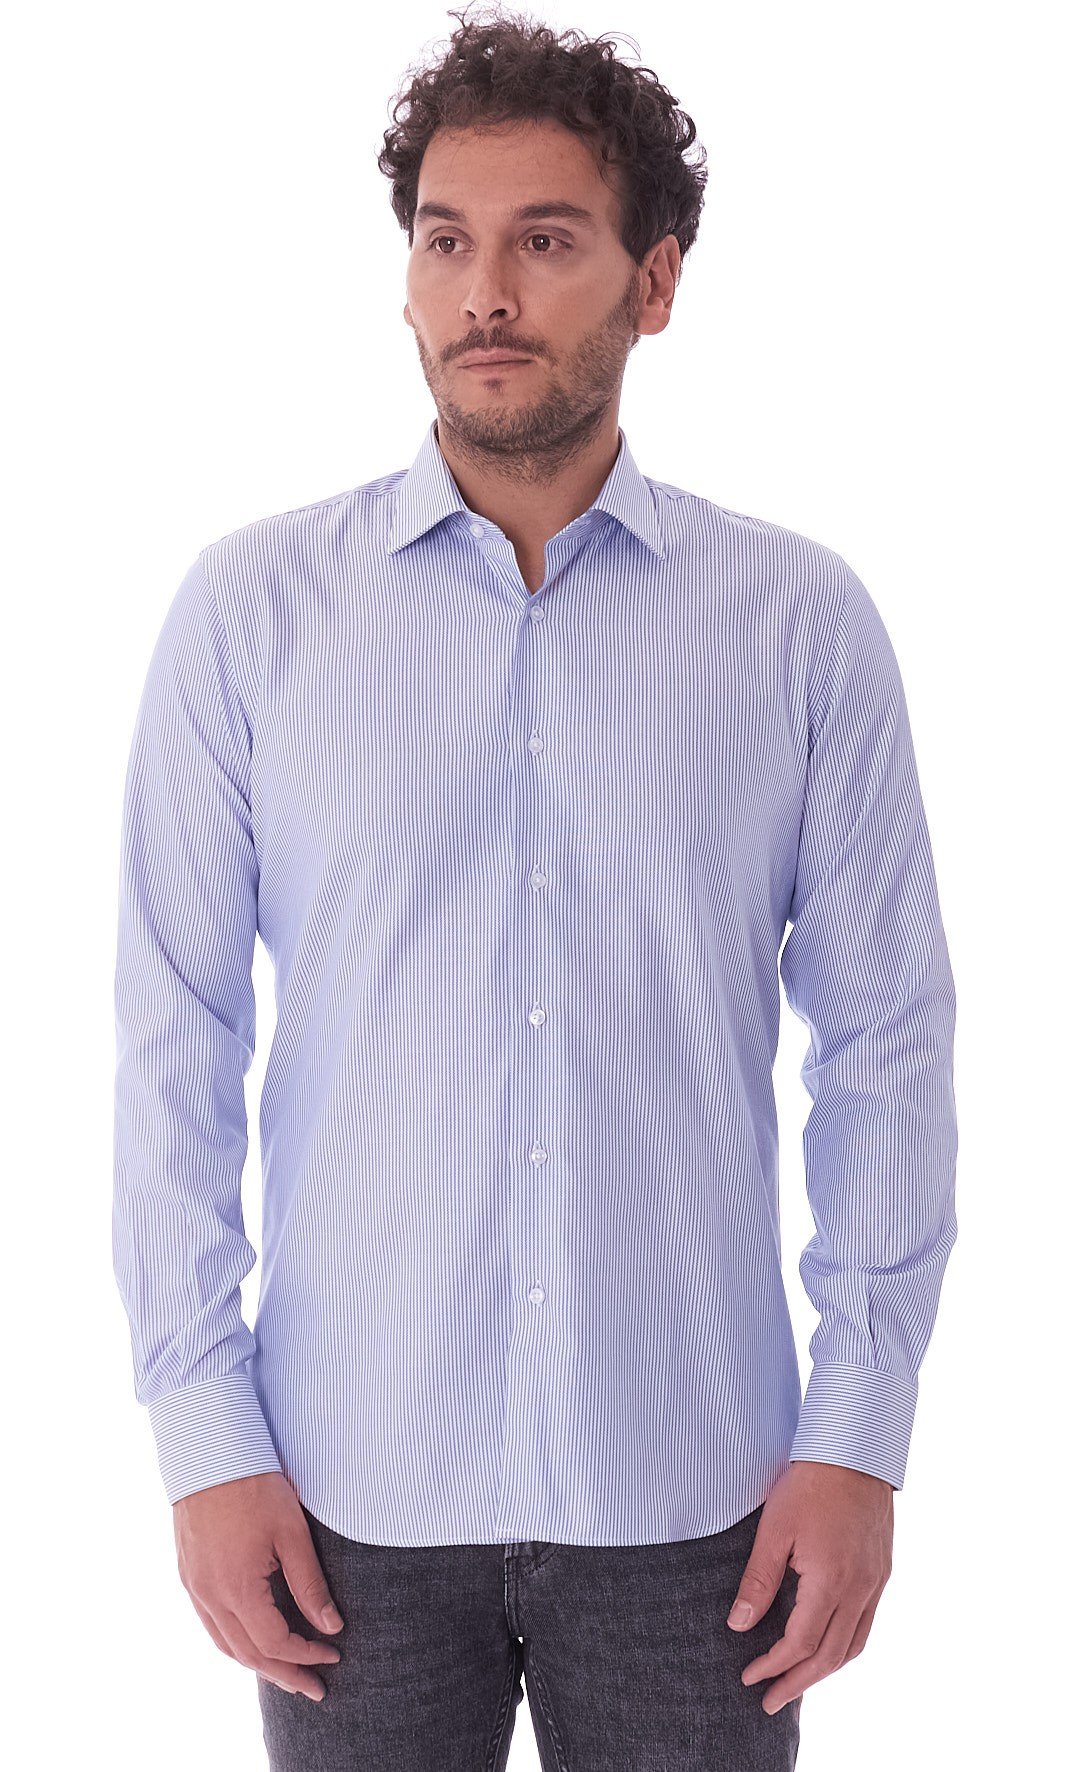 Men's striped double twisted shirt Queensway blue sky